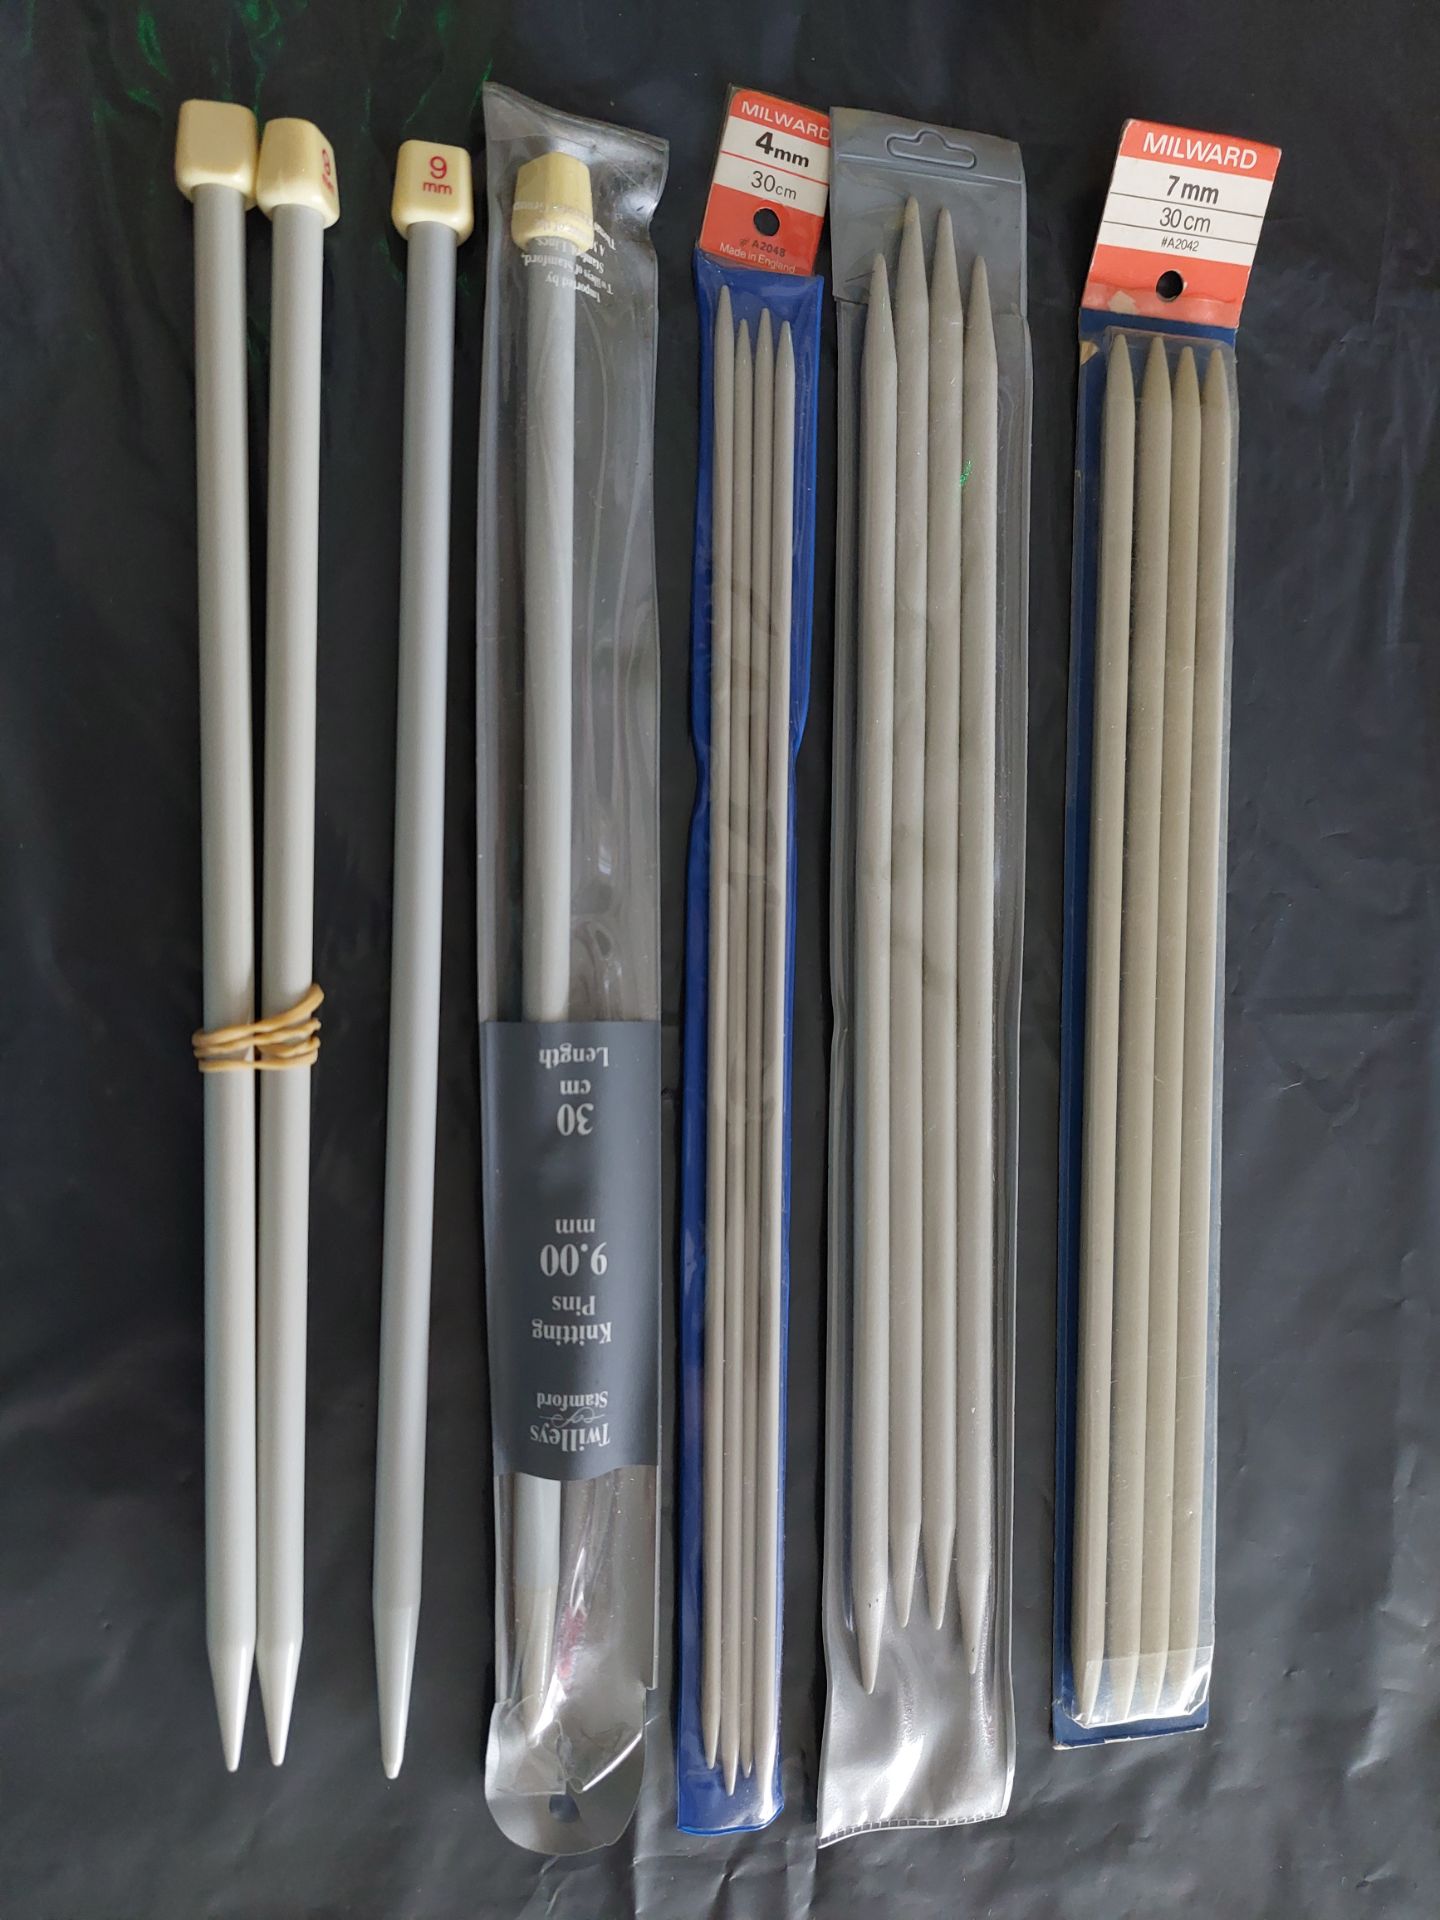 12 Pairs Or Sets of Knitting Needles. Mixed Styles and Sizes.